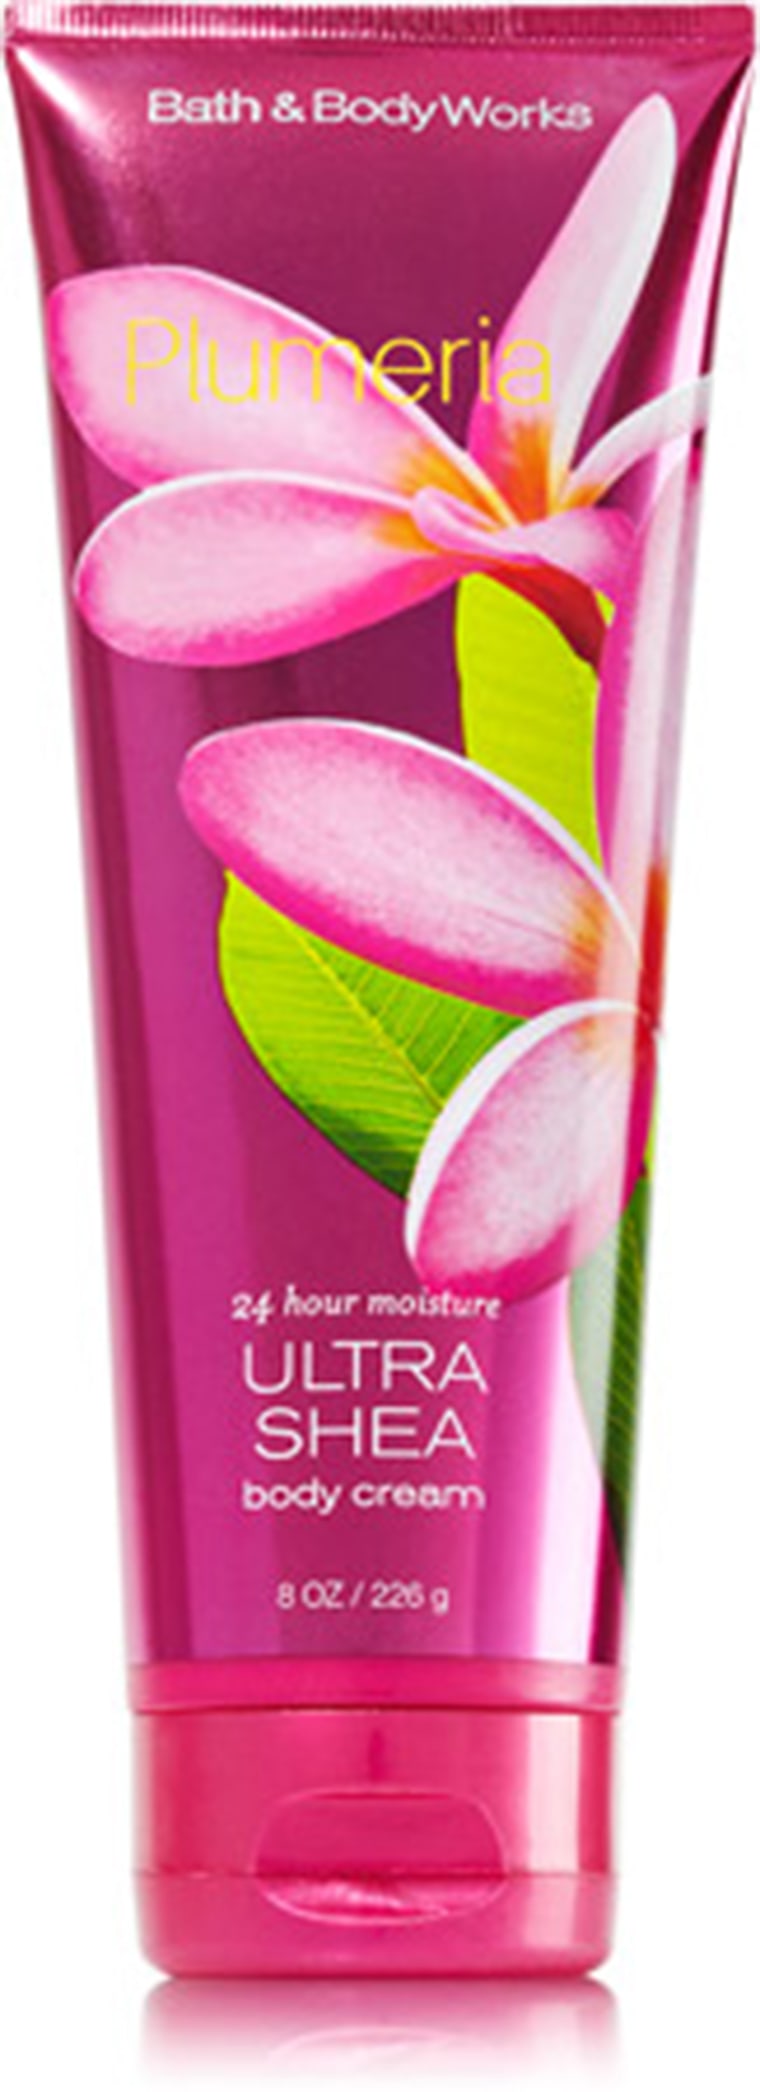 Bath and Body works brings back old scents